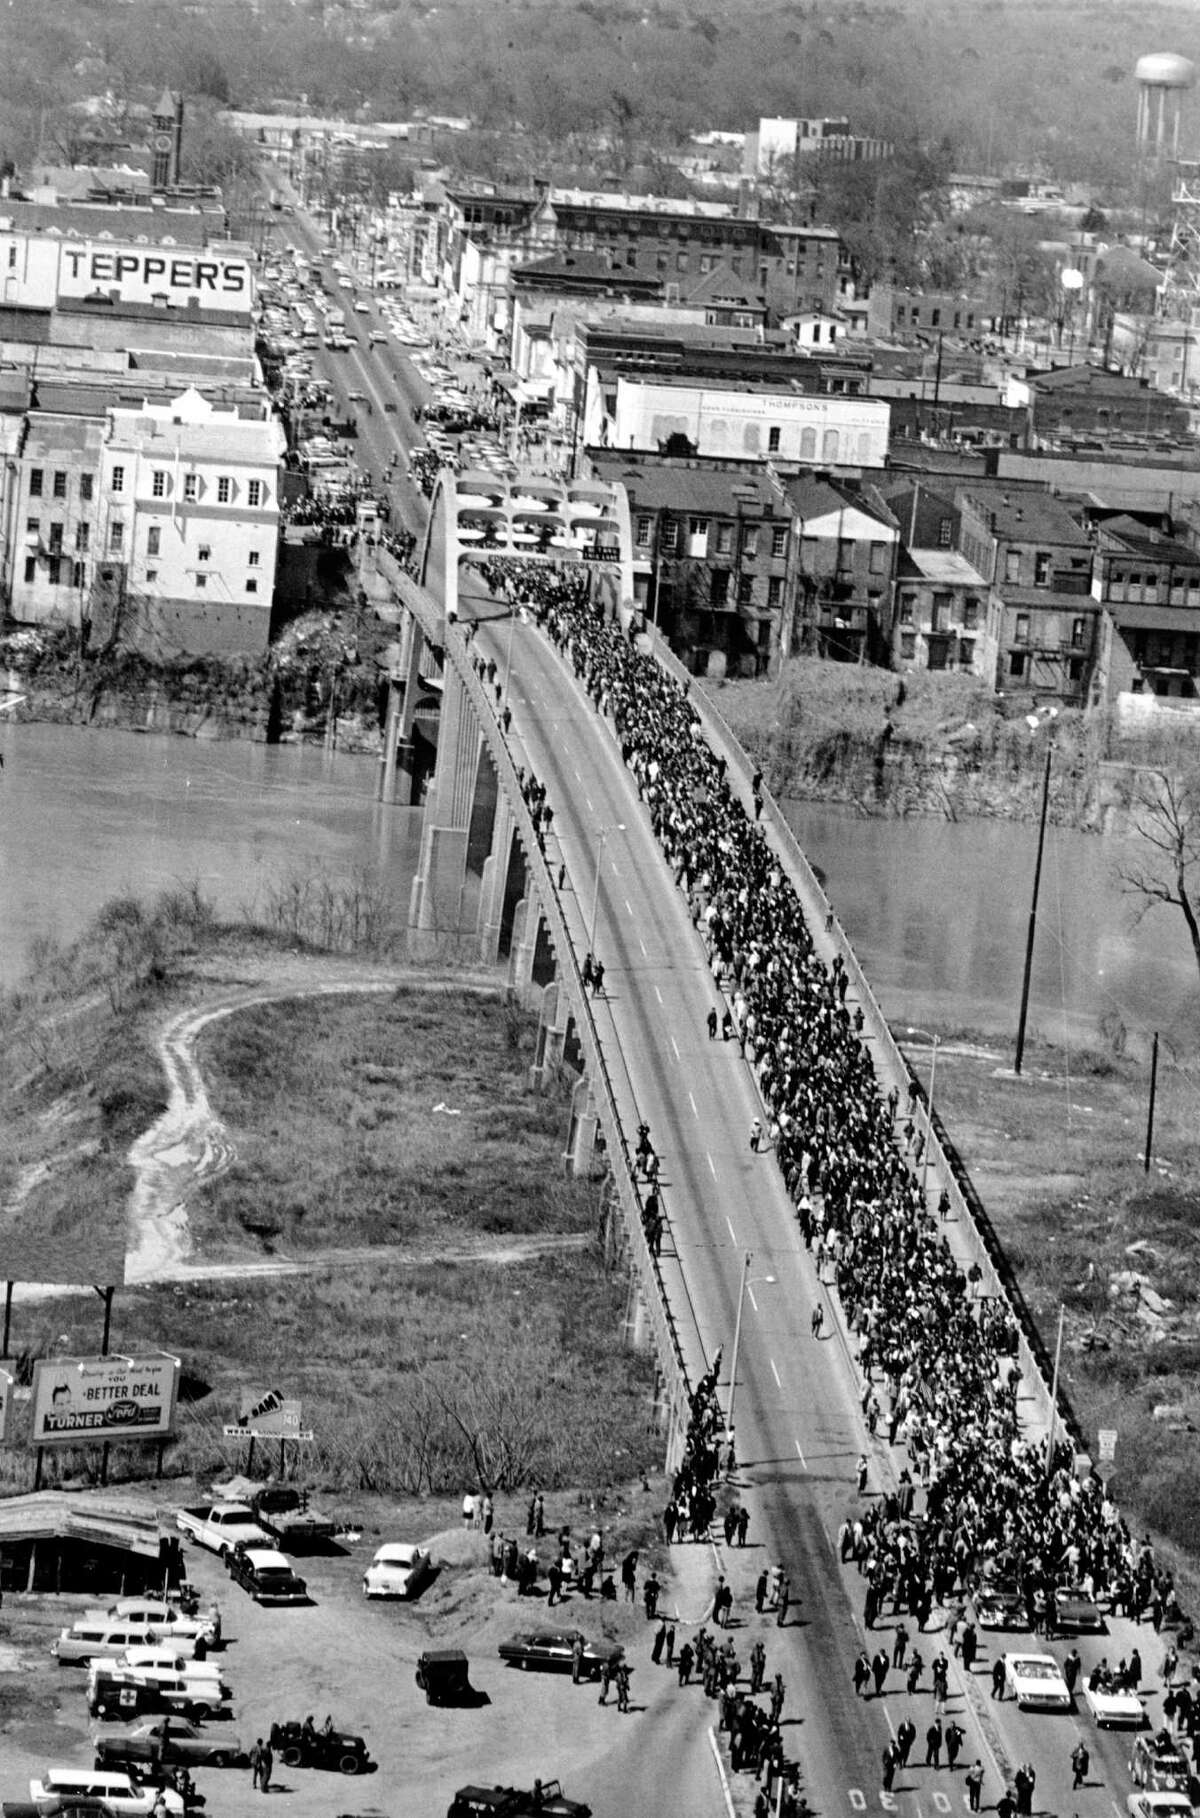 FILE - In this March 21, 1965 file photo, civil rights marchers cross the Alabama river on the Edmund Pettus Bridge in Selma, Ala. to the State Capitol of Montgomery. The Edmund Pettus Bridge gained instant immortality as a civil rights landmark when white police beat demonstrators marching for black voting rights 50 years ago this week in Selma, Alabama. Whatâs less known is that the bridge is named for a reputed leader of the early Ku Klux Klan. Now, a student group wants to rename the bridge that will be the backdrop when President Barack Obama visits Selma on March 7, 2015. (AP Photo/File)